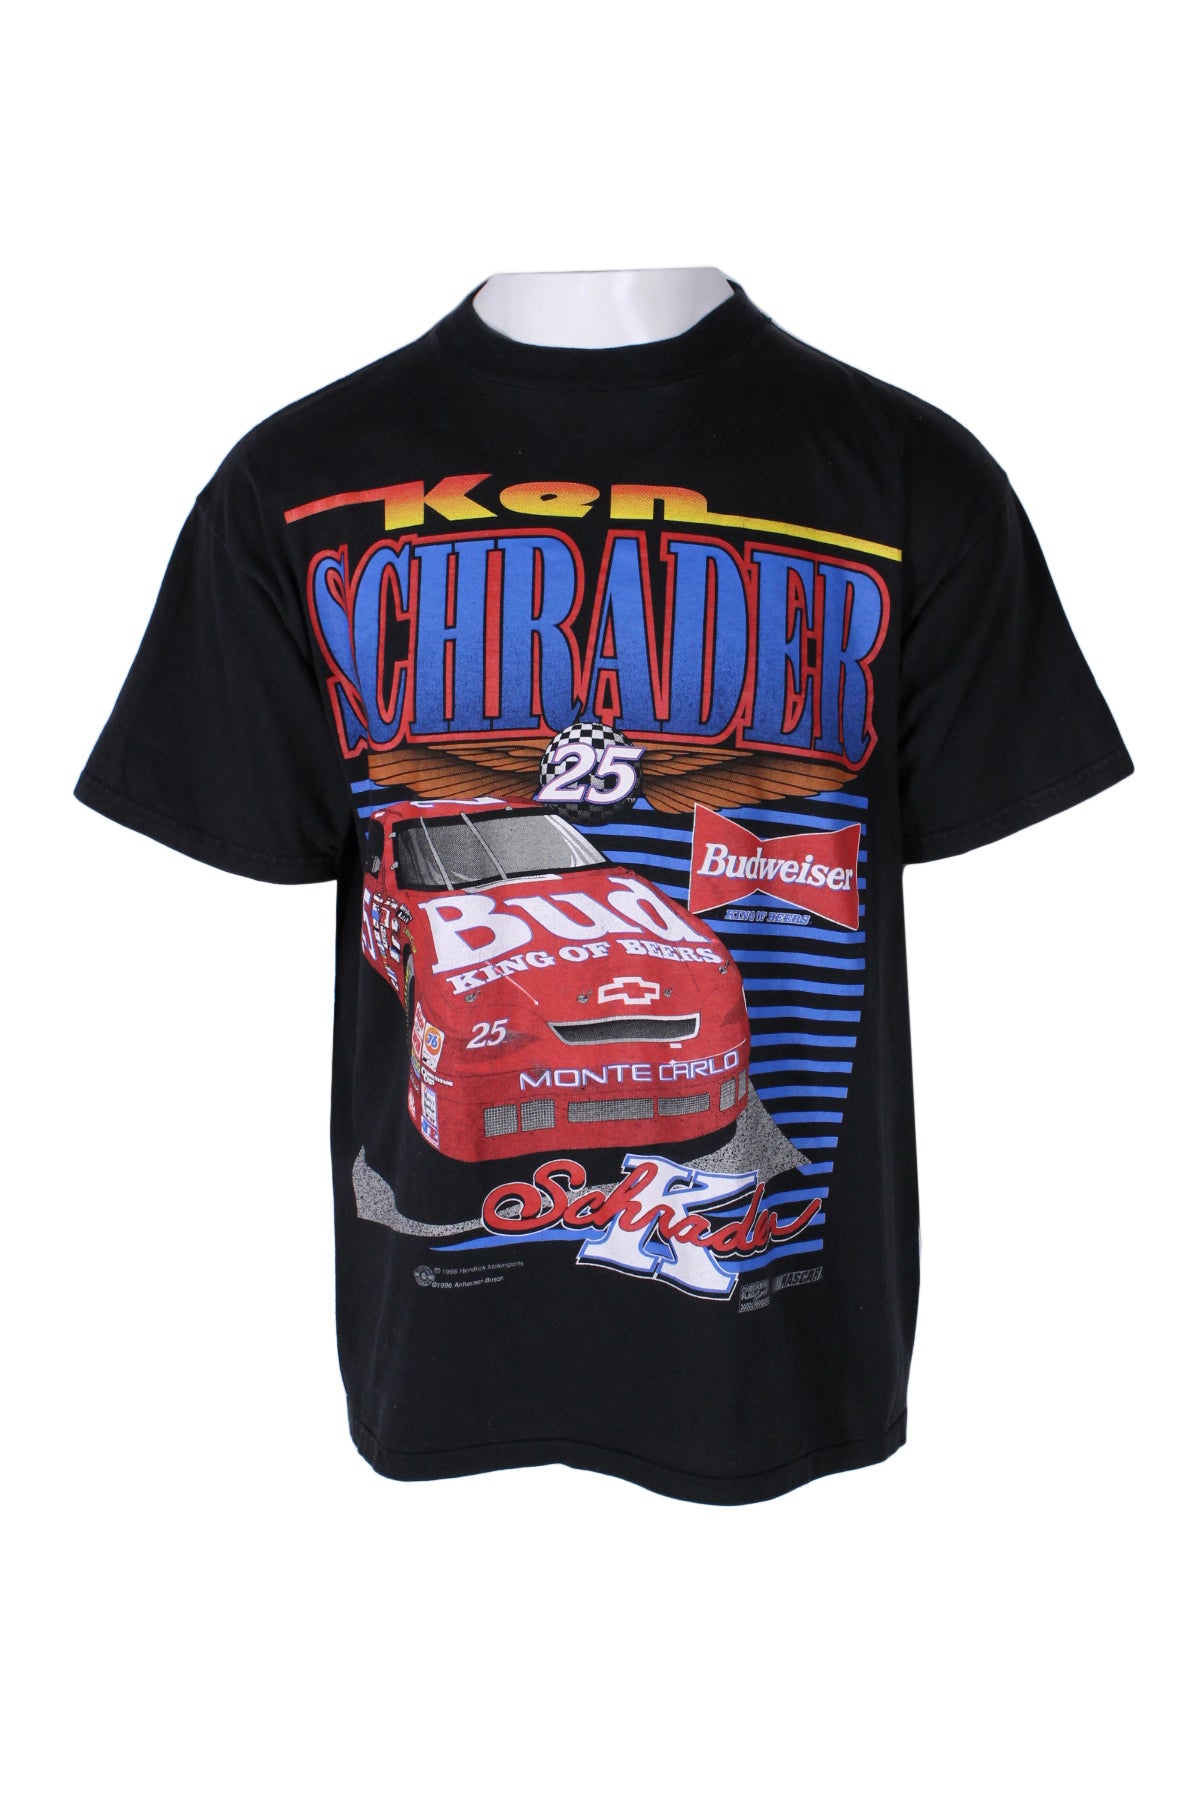 front of  tultex black cotton short sleeve graphic tee featuring 'ken schrader' and race car/budweiser logo printed at front, ribbed crew neckline, and double-stitch finishing.  